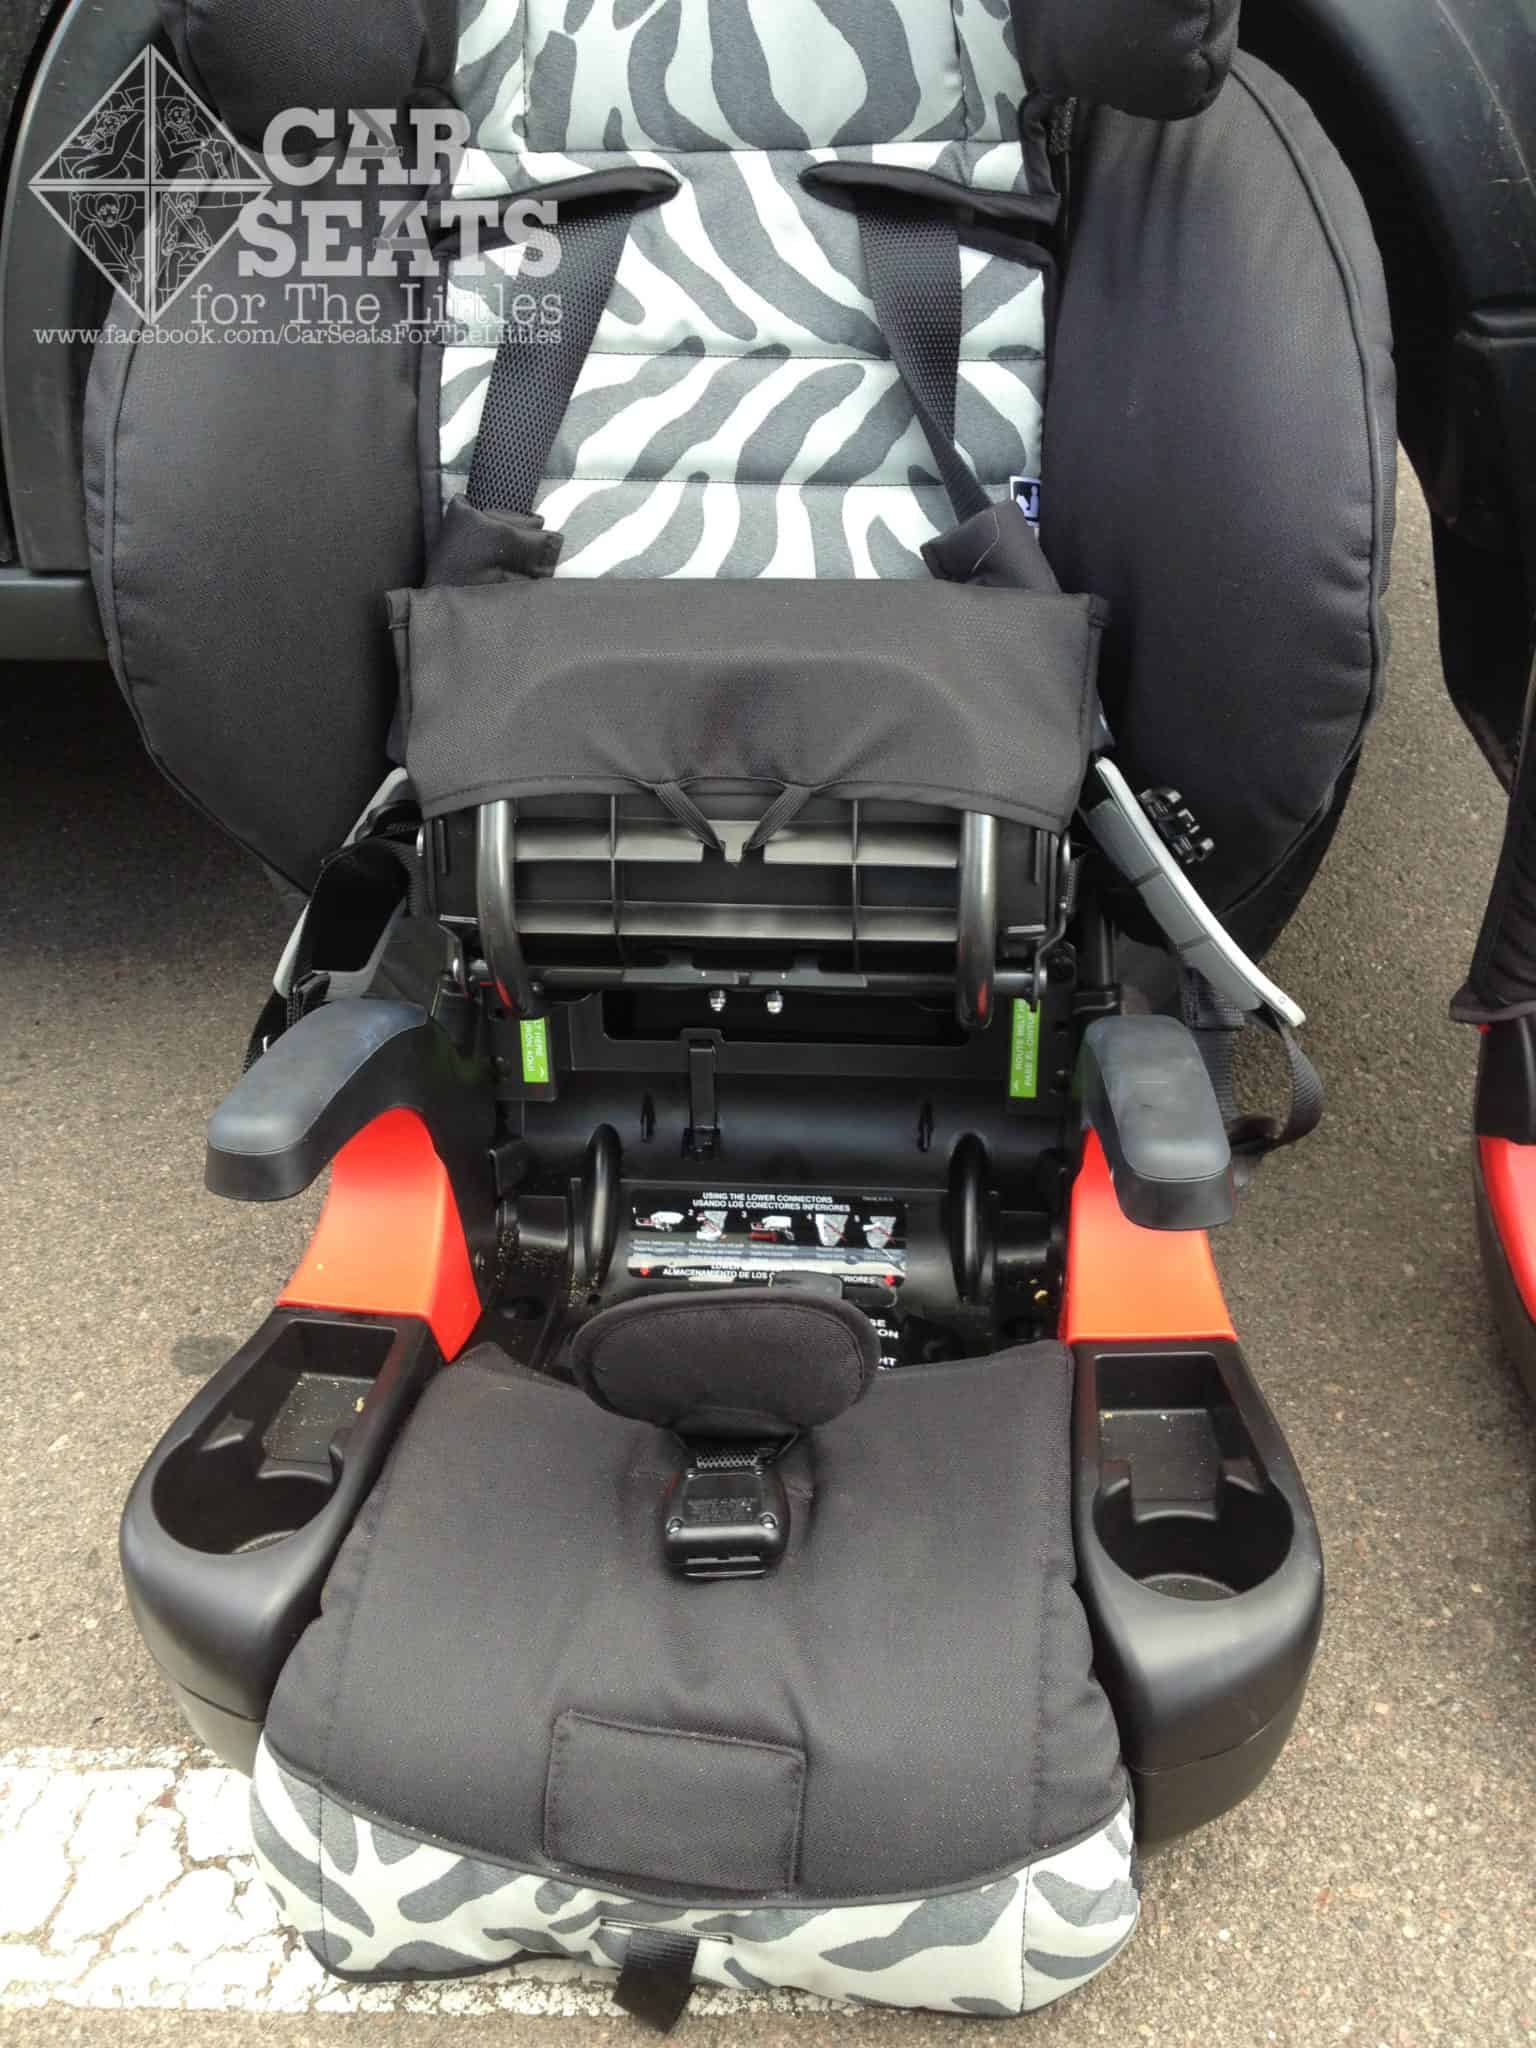 Britax Frontier 90, Frontier 85, booster, high back booster, no back booster, hbb, nbb, click tight, combination seat